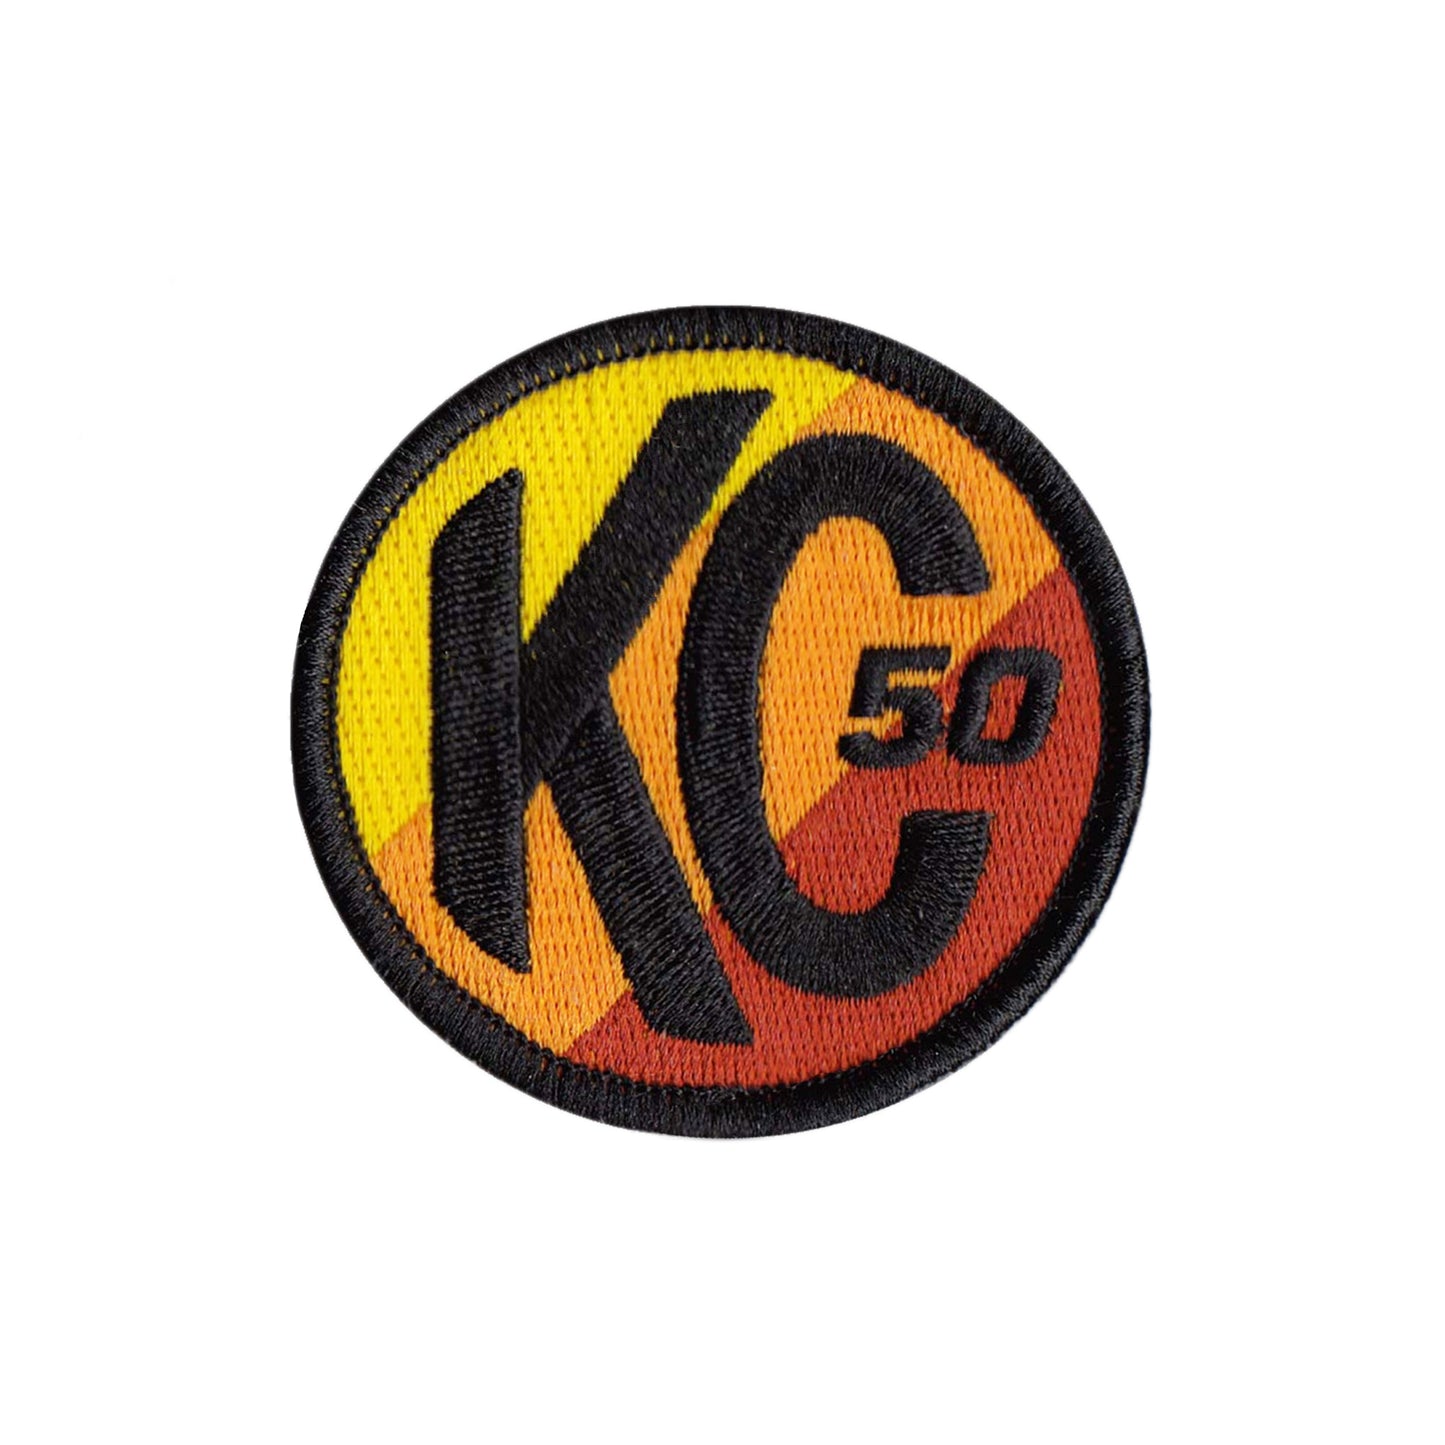 KC Racer 50 Hook and Loop Patch - Round - 2.5"